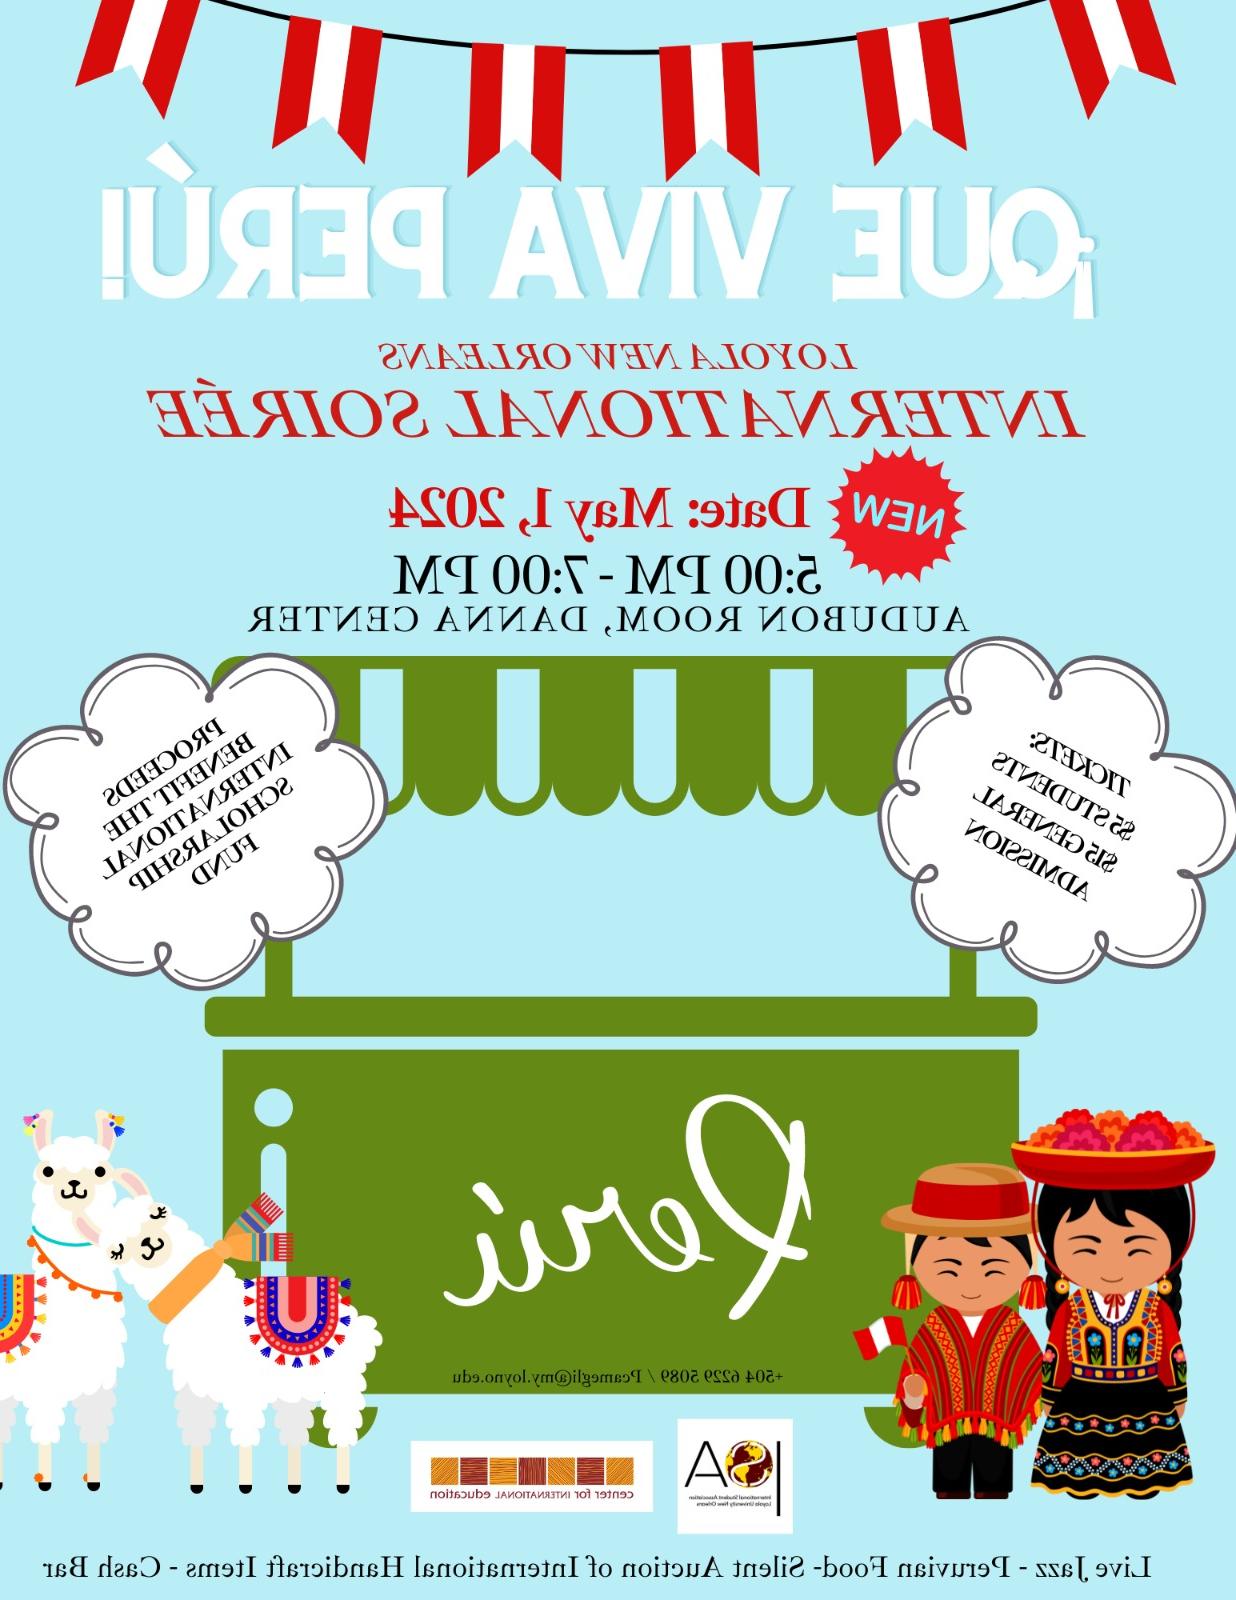 flyer for fair displaying cartoon food stalls, 骆驼, a couple dressed in traditional peruvian clothing. date and time of fair are overlaid on the stall.